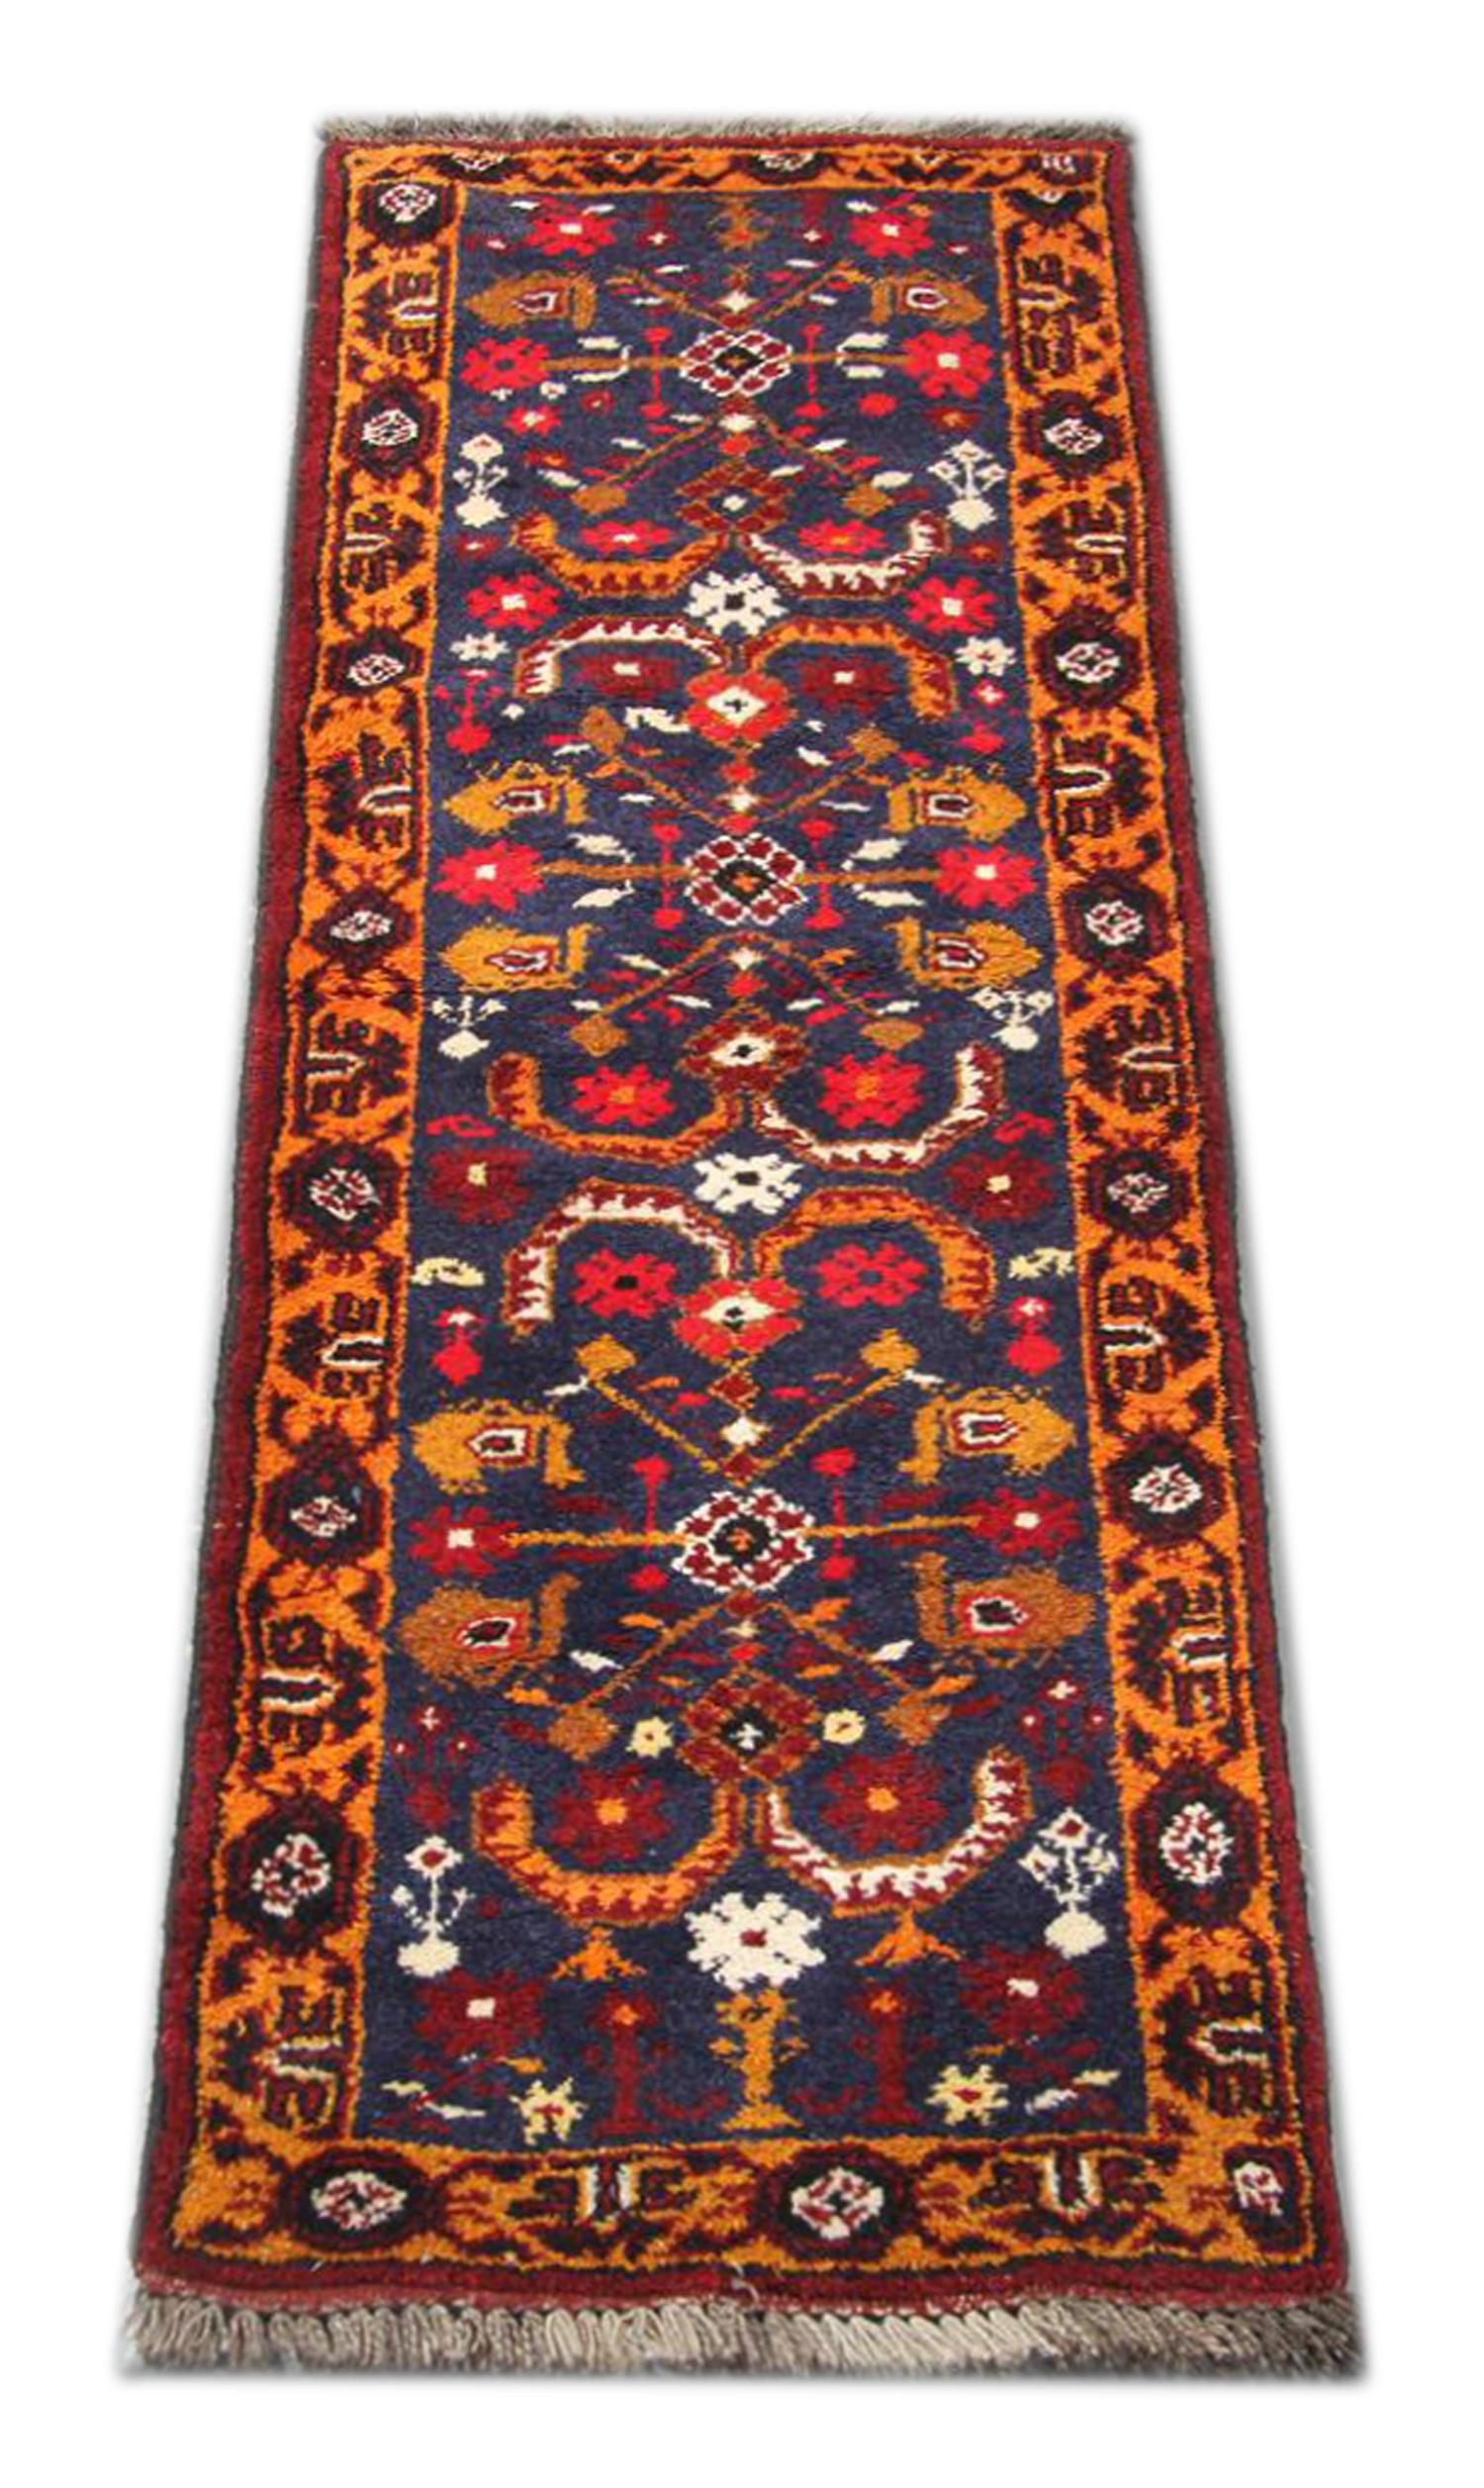 Are you looking for a new runner rug to decorate your hallway? Then look no further! This truly unique Runner rug has been hand-woven with a highly detailed symmetrical, tribal motif design, with a simple red and cream colour palette. Featuring a